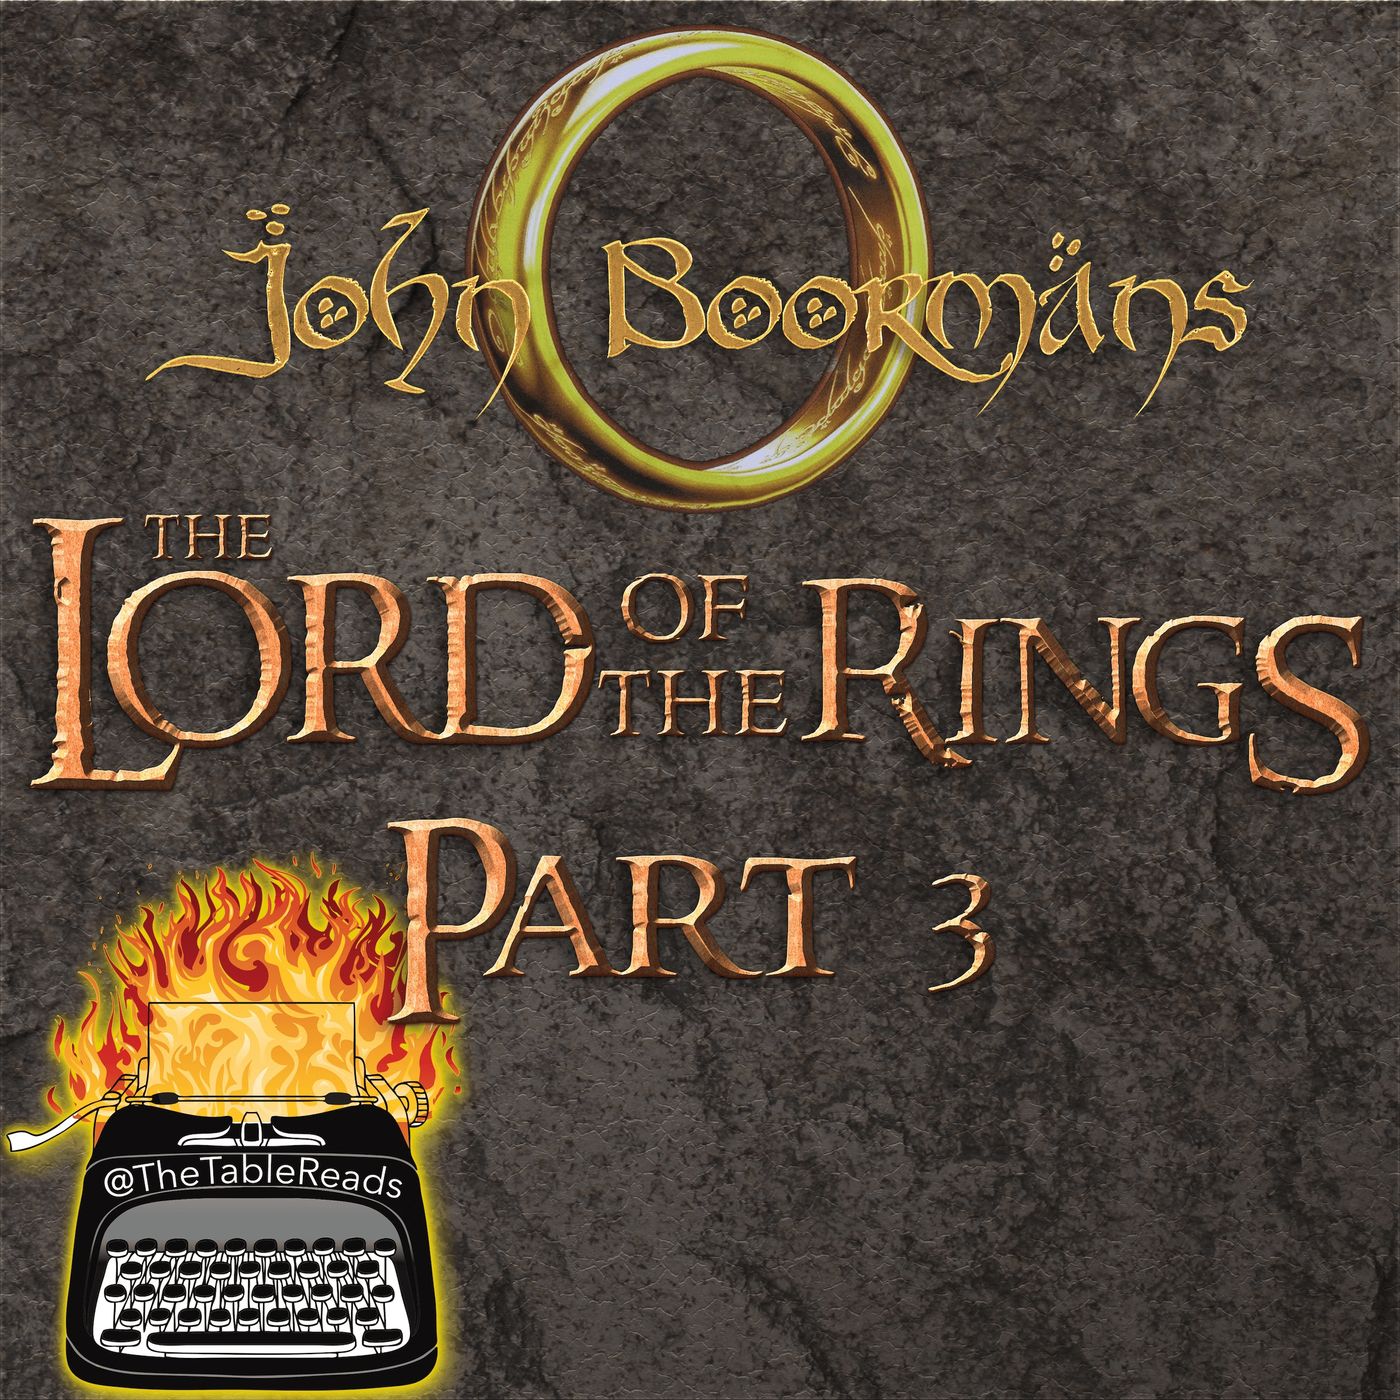 102 - John Boorman’s Lord of the Rings, Part 3